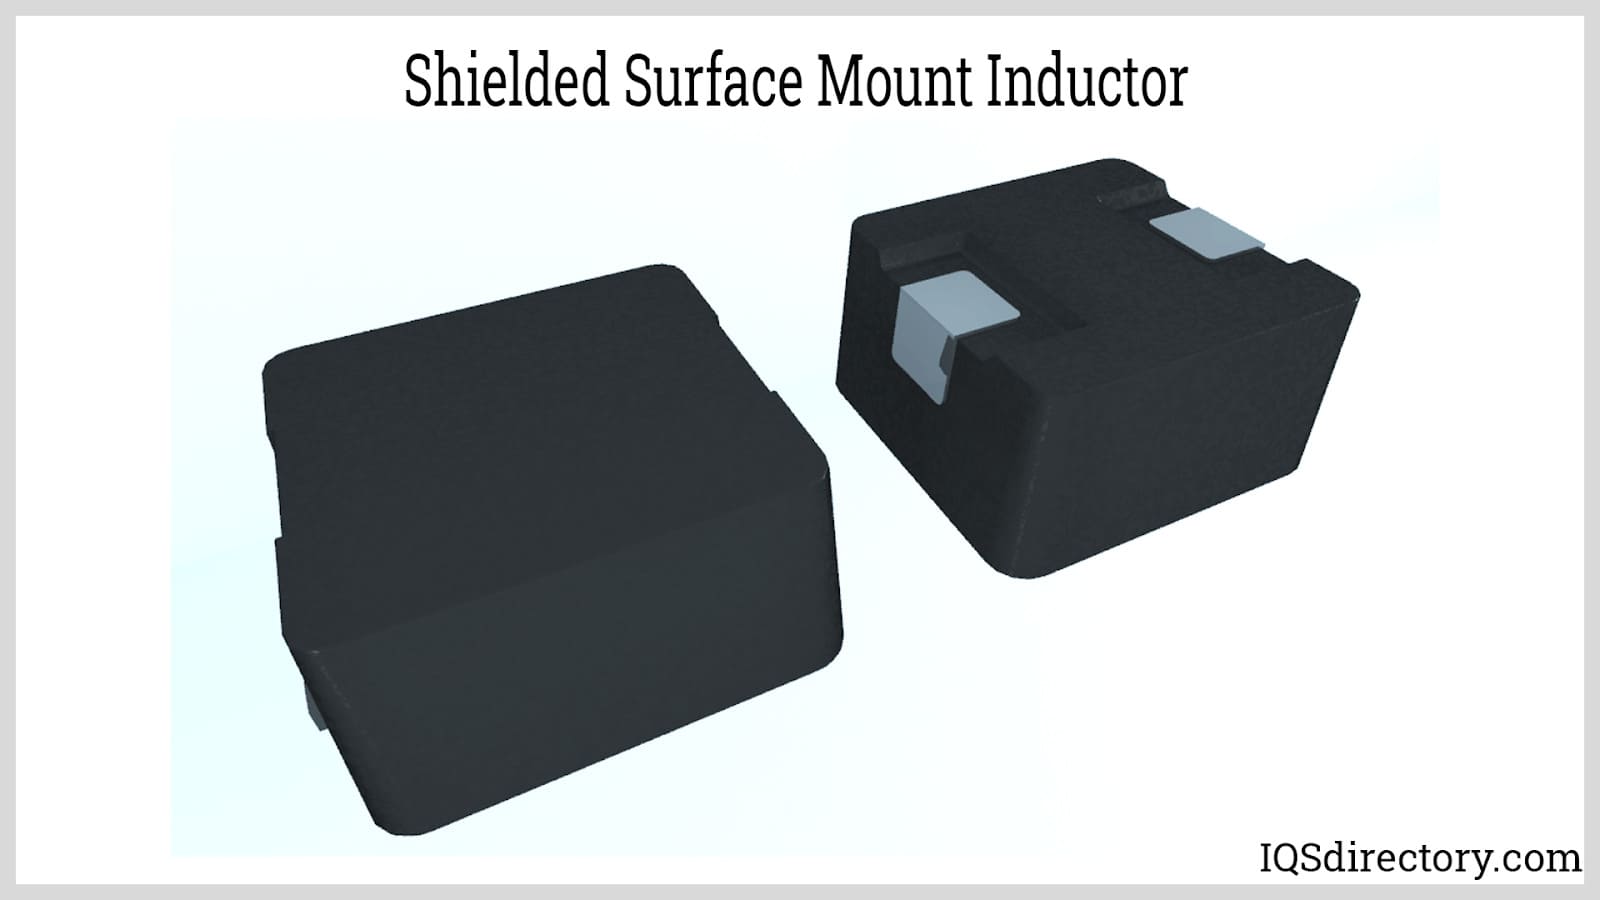 Shielded Surface Mount Inductor